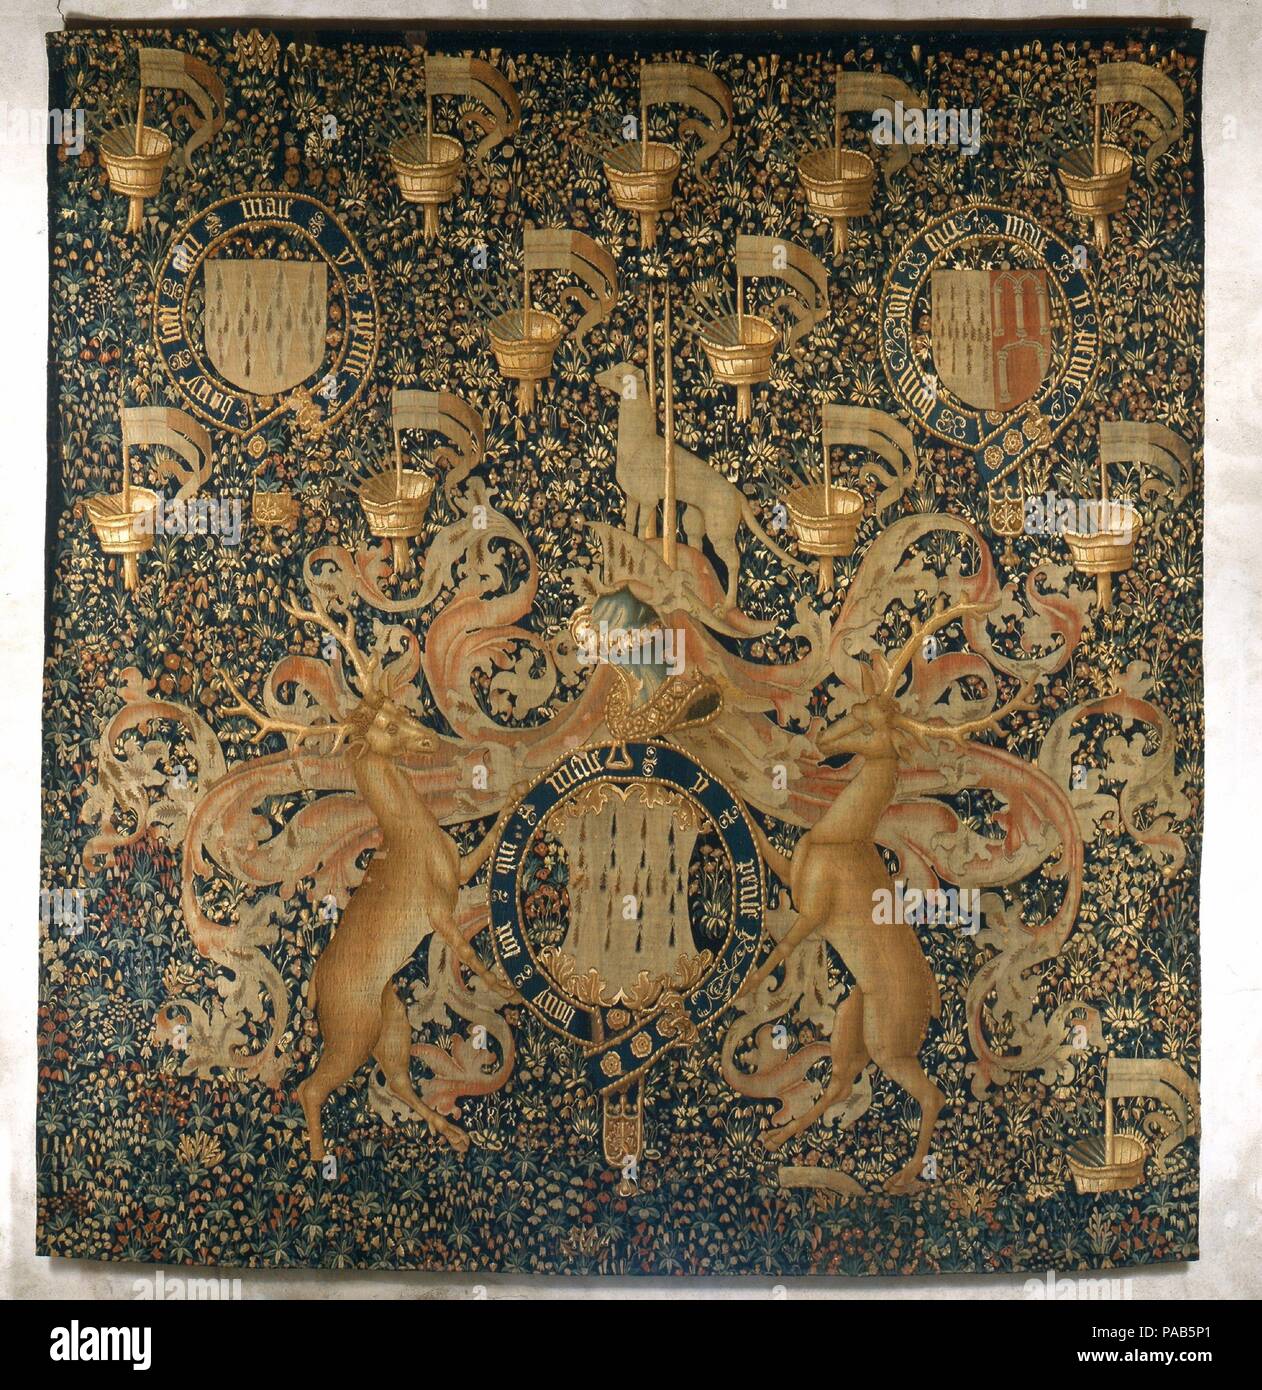 Tapestry with Armorial Bearings and Badges of John, Lord Dynham. Culture: South Netherlandish. Dimensions: 152 x 145 in.  (386.1 x 368.3 cm). Date: ca. 1488-1501.  John, Lord Dynham was a naval commander under five kings and treasurer of England from 1486 to 1501. The inscription around the garter is the motto of the Order of the Garter, to which Lord Dynham was appointed in 1487. The tapestry was probably woven to commemorate this event. The supporters in the form of stags -- or harts -- refer to Lord Dynham's family seat, Hartland. The repeated device of the topcastle of a warship with javel Stock Photo